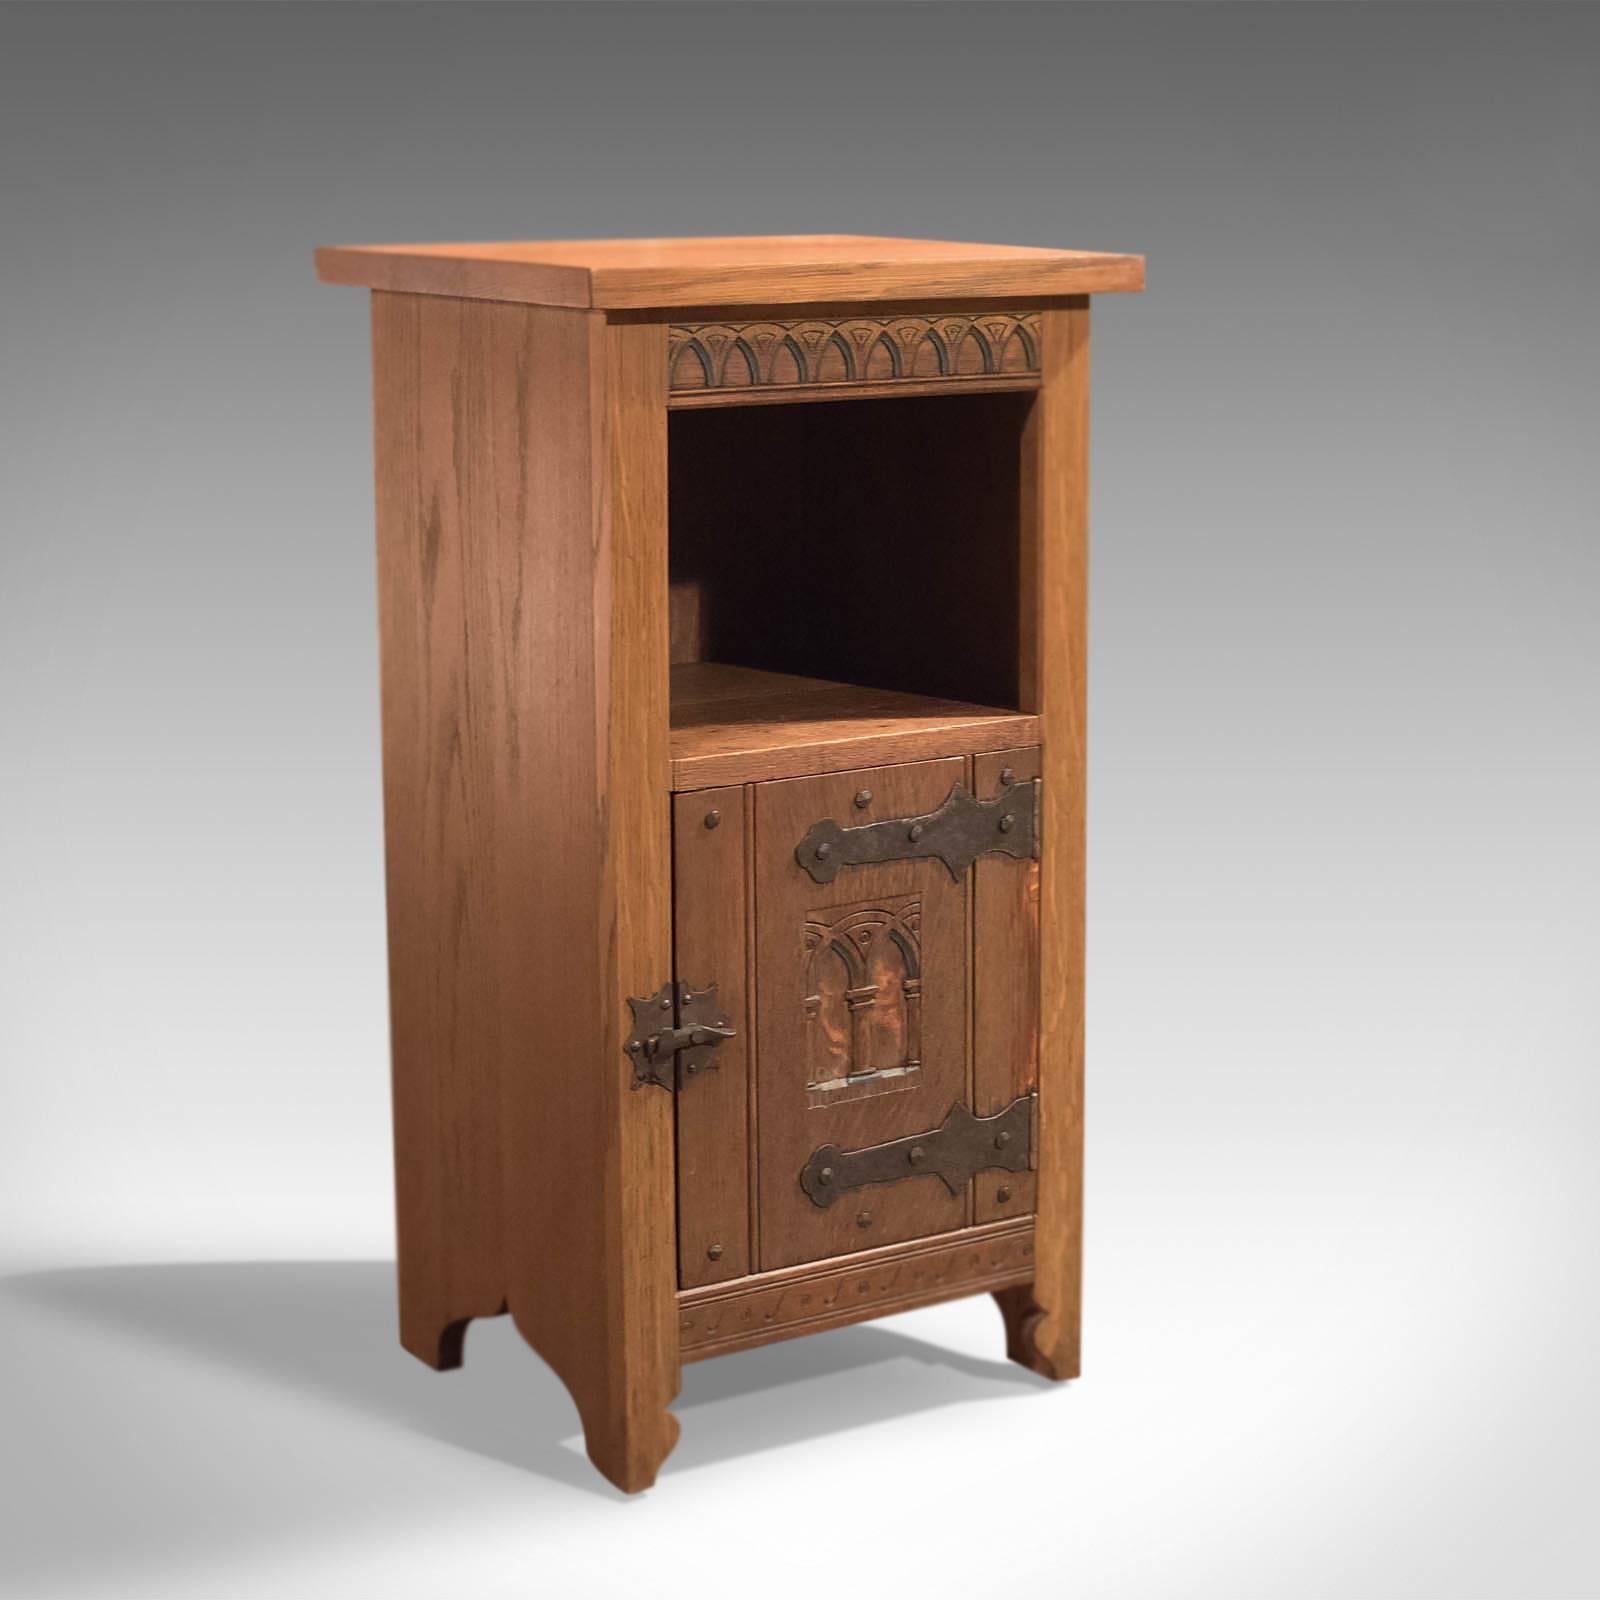 This is a vintage Mid-Century high quality oak bedside cabinet in the tradition of the Arts & Crafts movement.

Raised on shaped feet and in good proportion, the cabinet features a single cupboard below cubby hole.

The cabinet door is